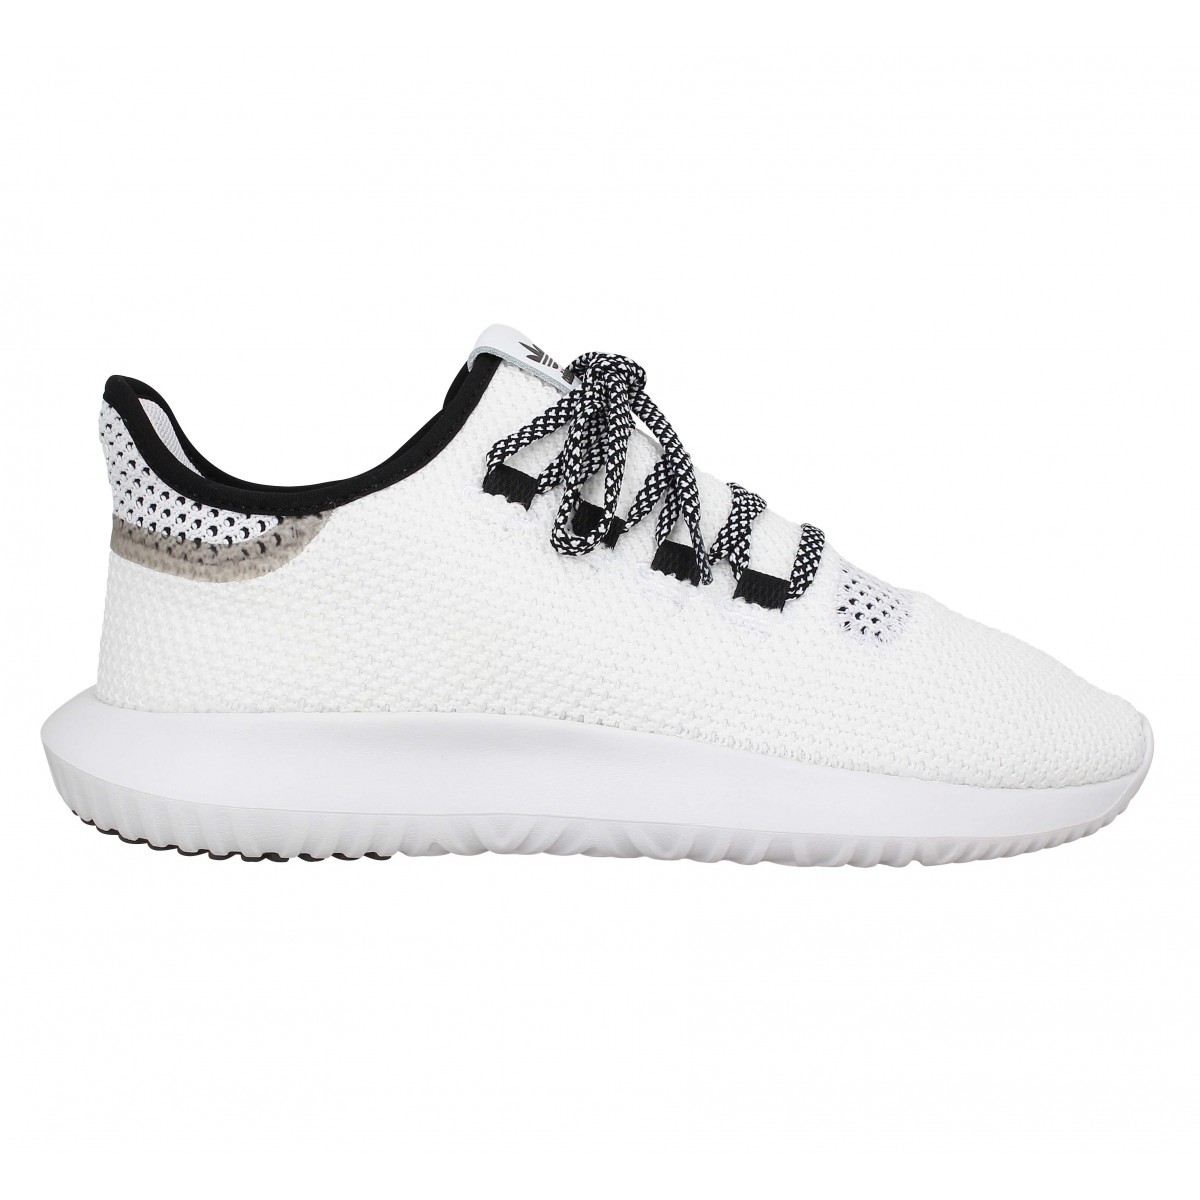 Adidas tubular shadow toile homme blanc homme | Fanny chaussures